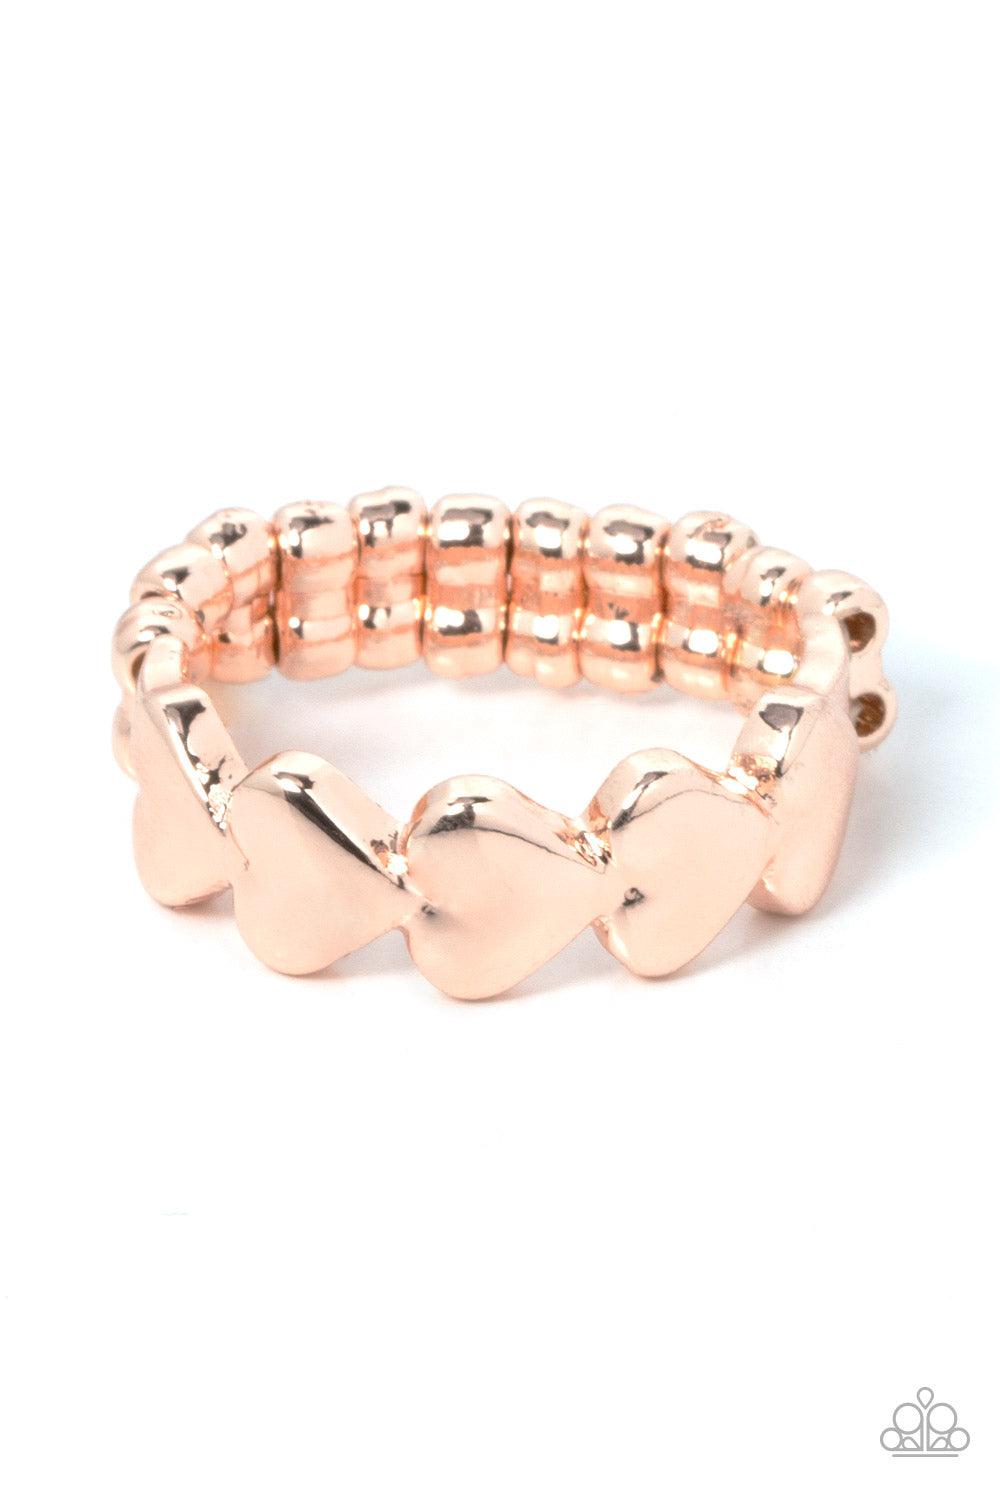 Rhythm of Love Rose Gold Ring - Paparazzi Accessories- lightbox - CarasShop.com - $5 Jewelry by Cara Jewels